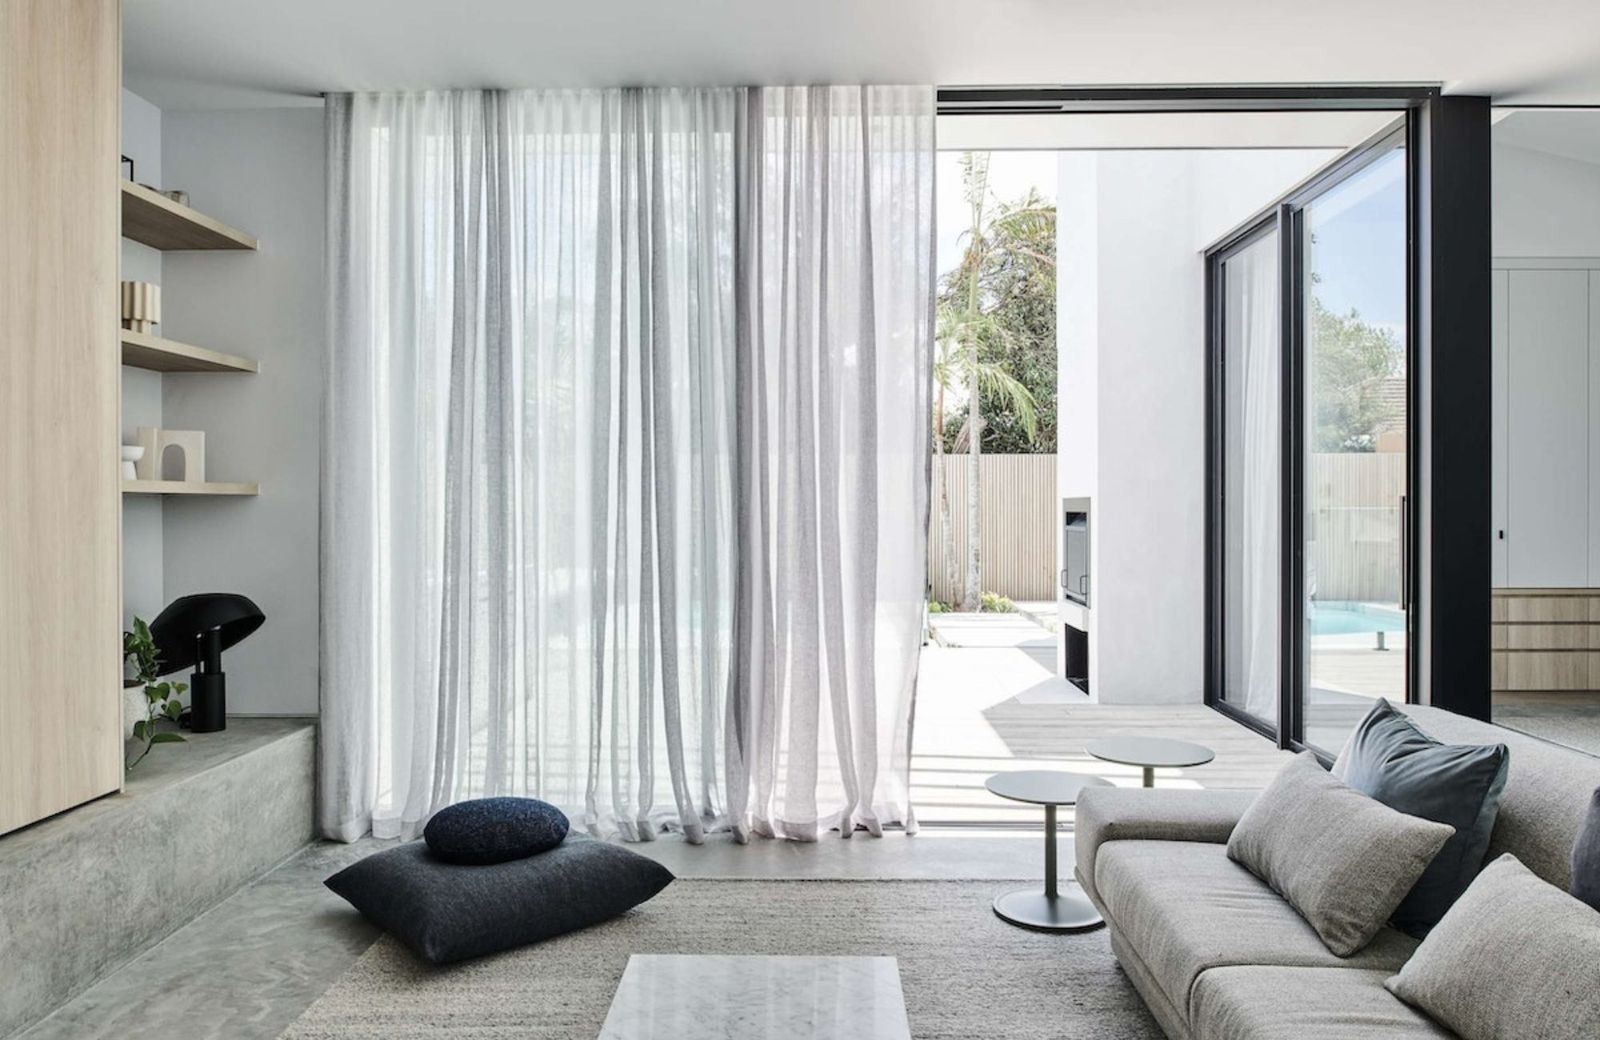 Elsternwick House by Merrylees Architecture & Interior Design. Living room opening up to our door courtyard